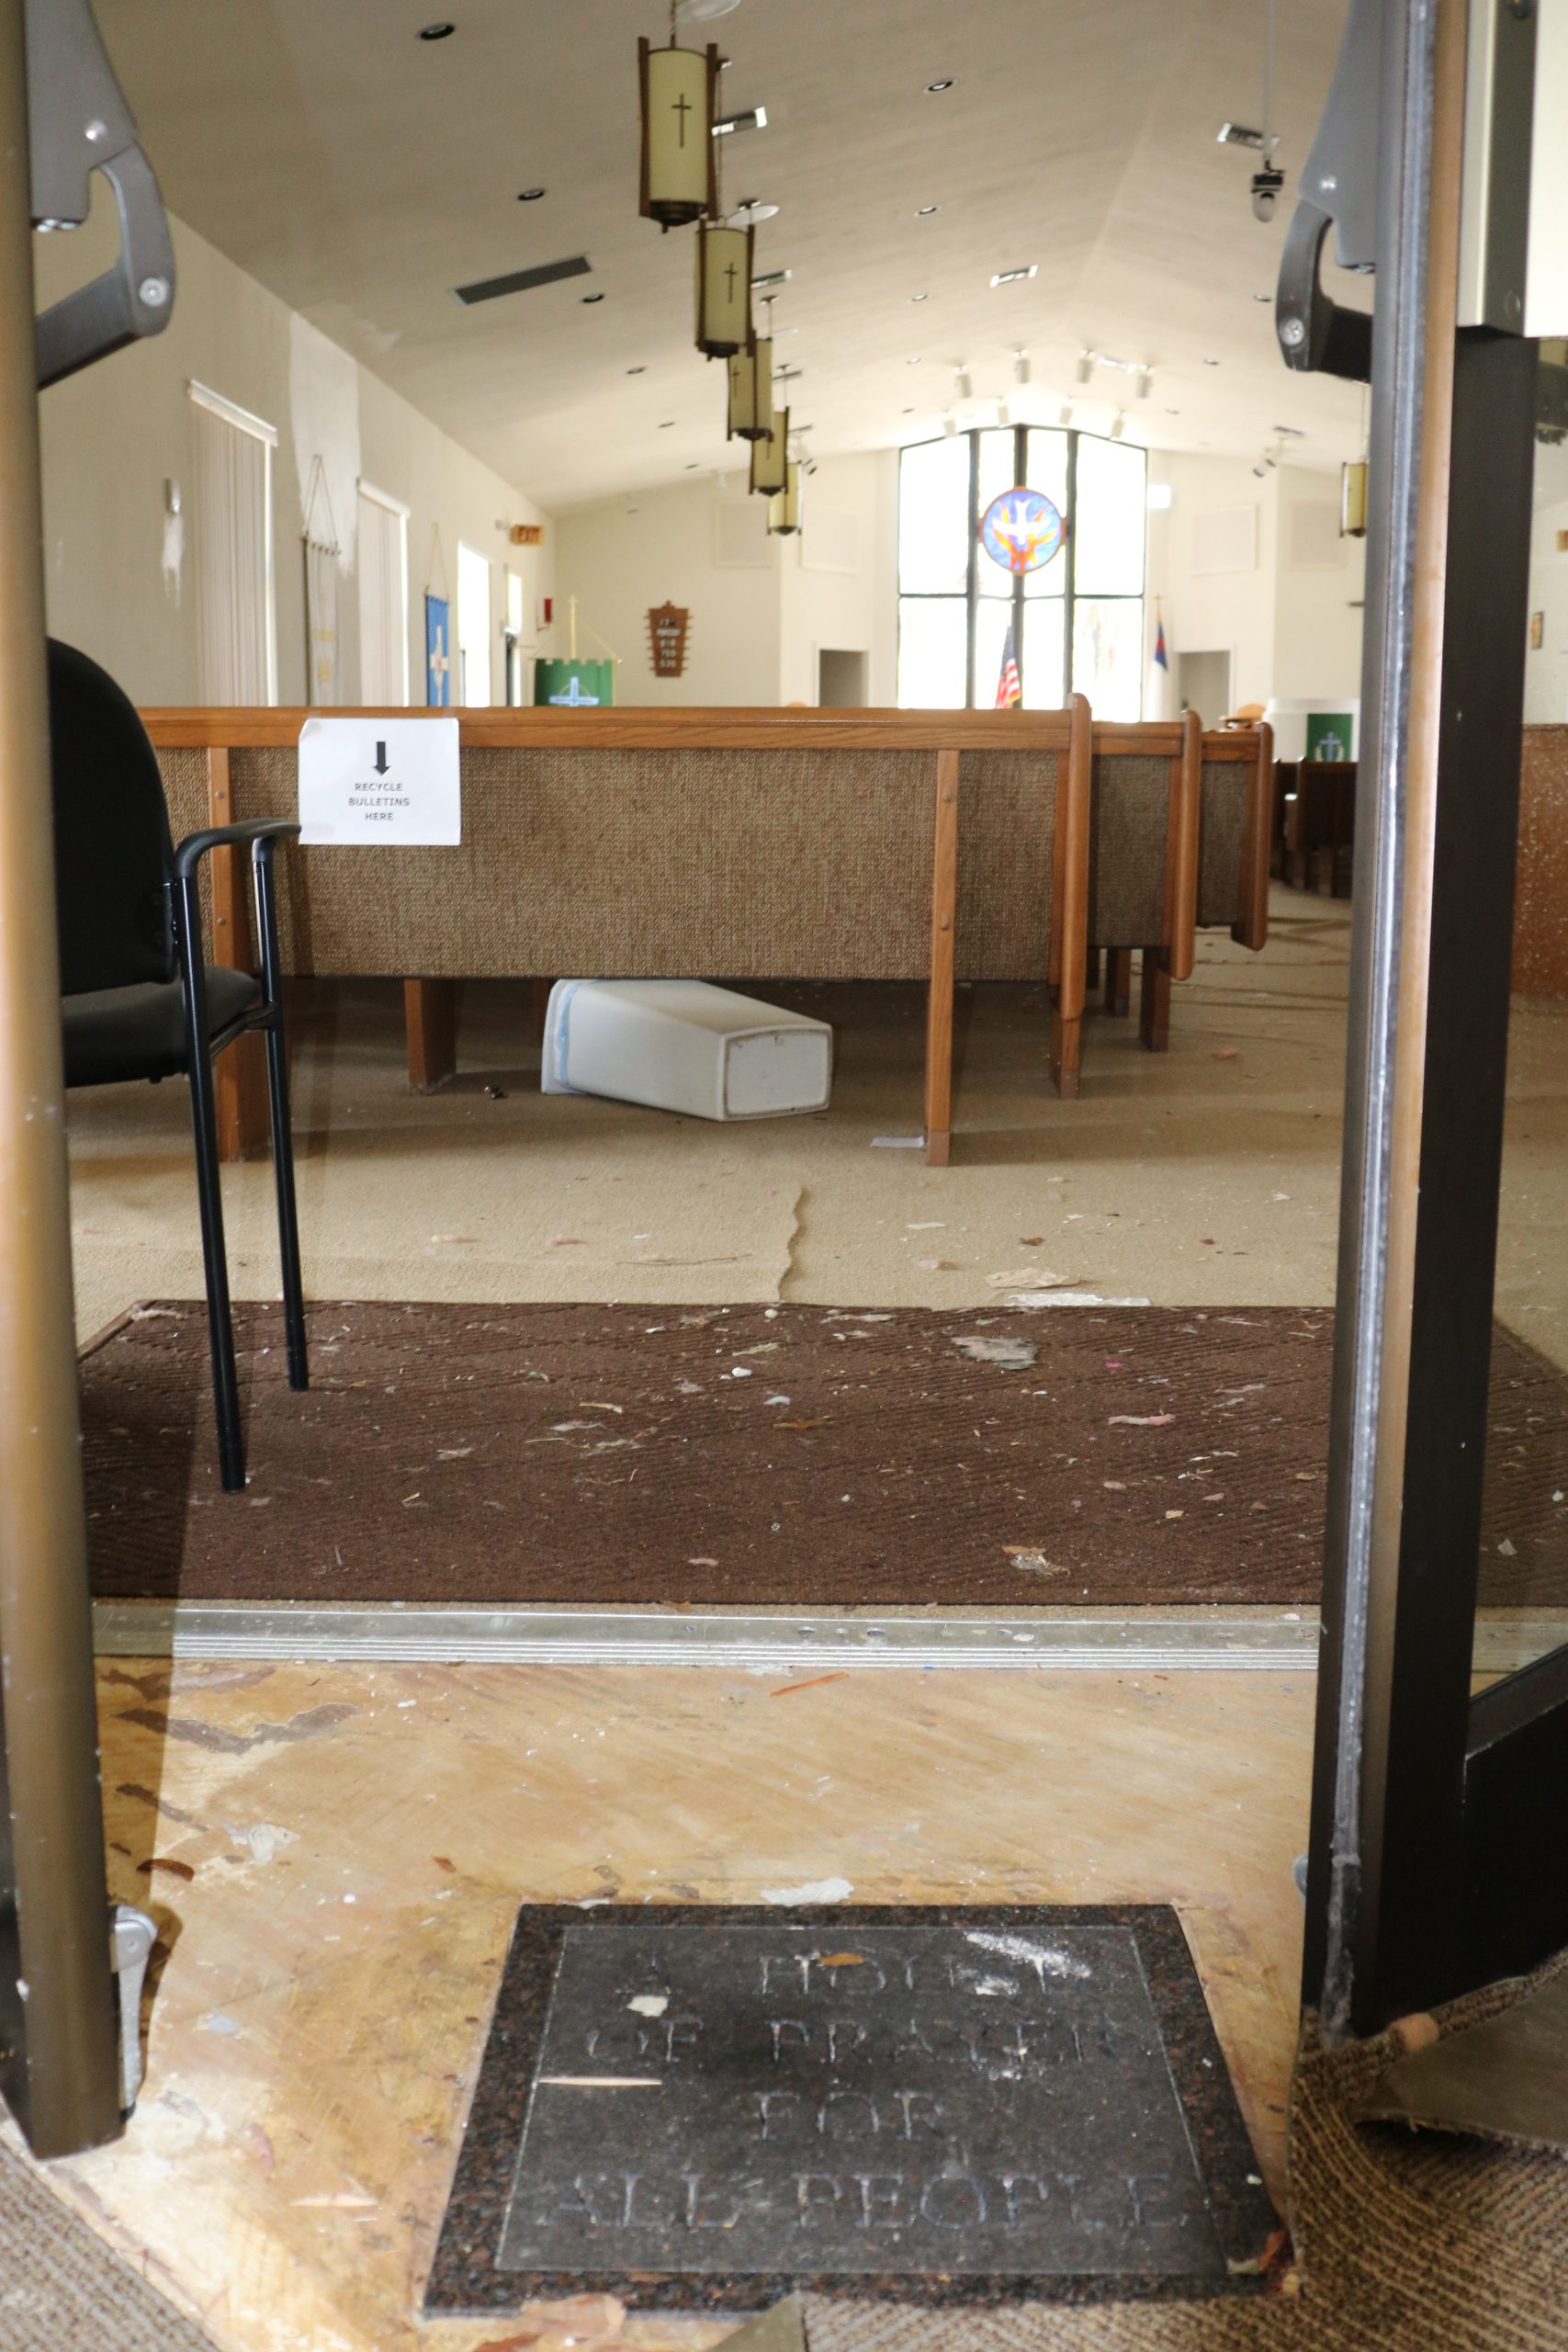 The entrance to a church sanctuary. There is debris across the floor and back pews. At the door threshold, a stone plaque in the ground reads "House of Prayer for All People."